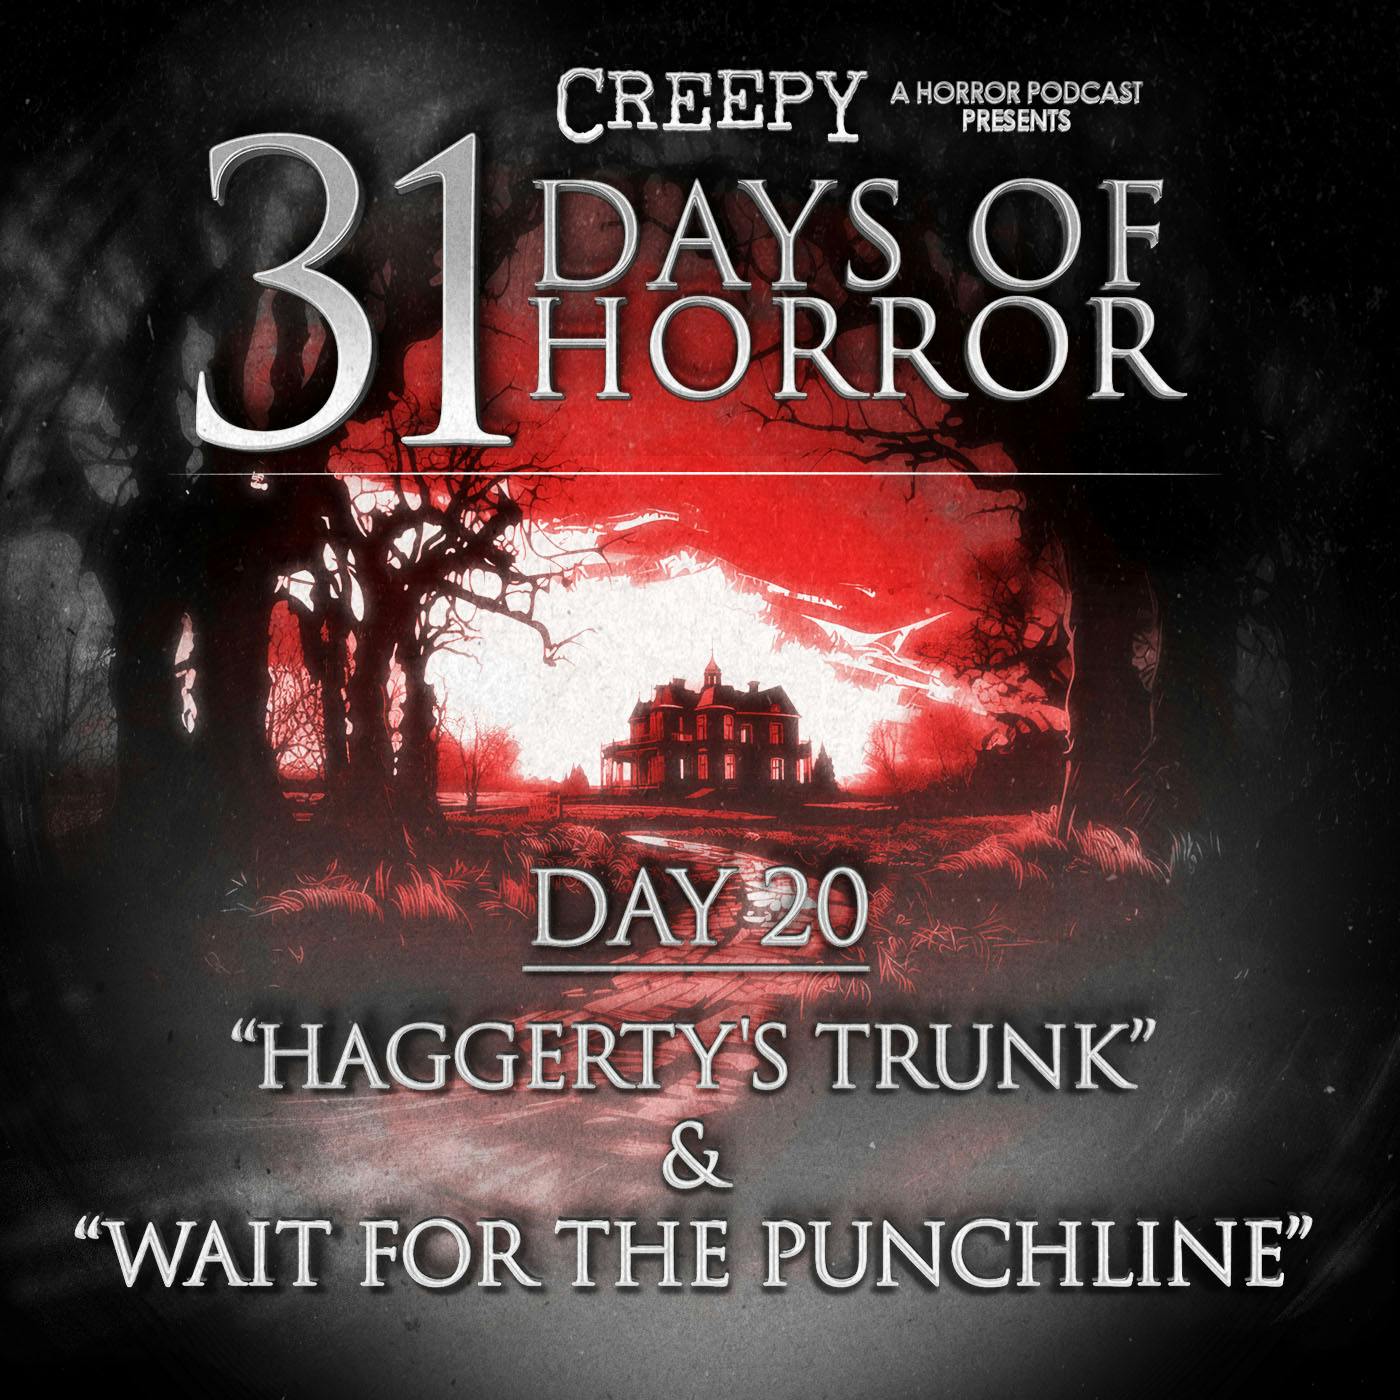 Day 20 - Haggerty’s Trunk & Wait for the Punchline